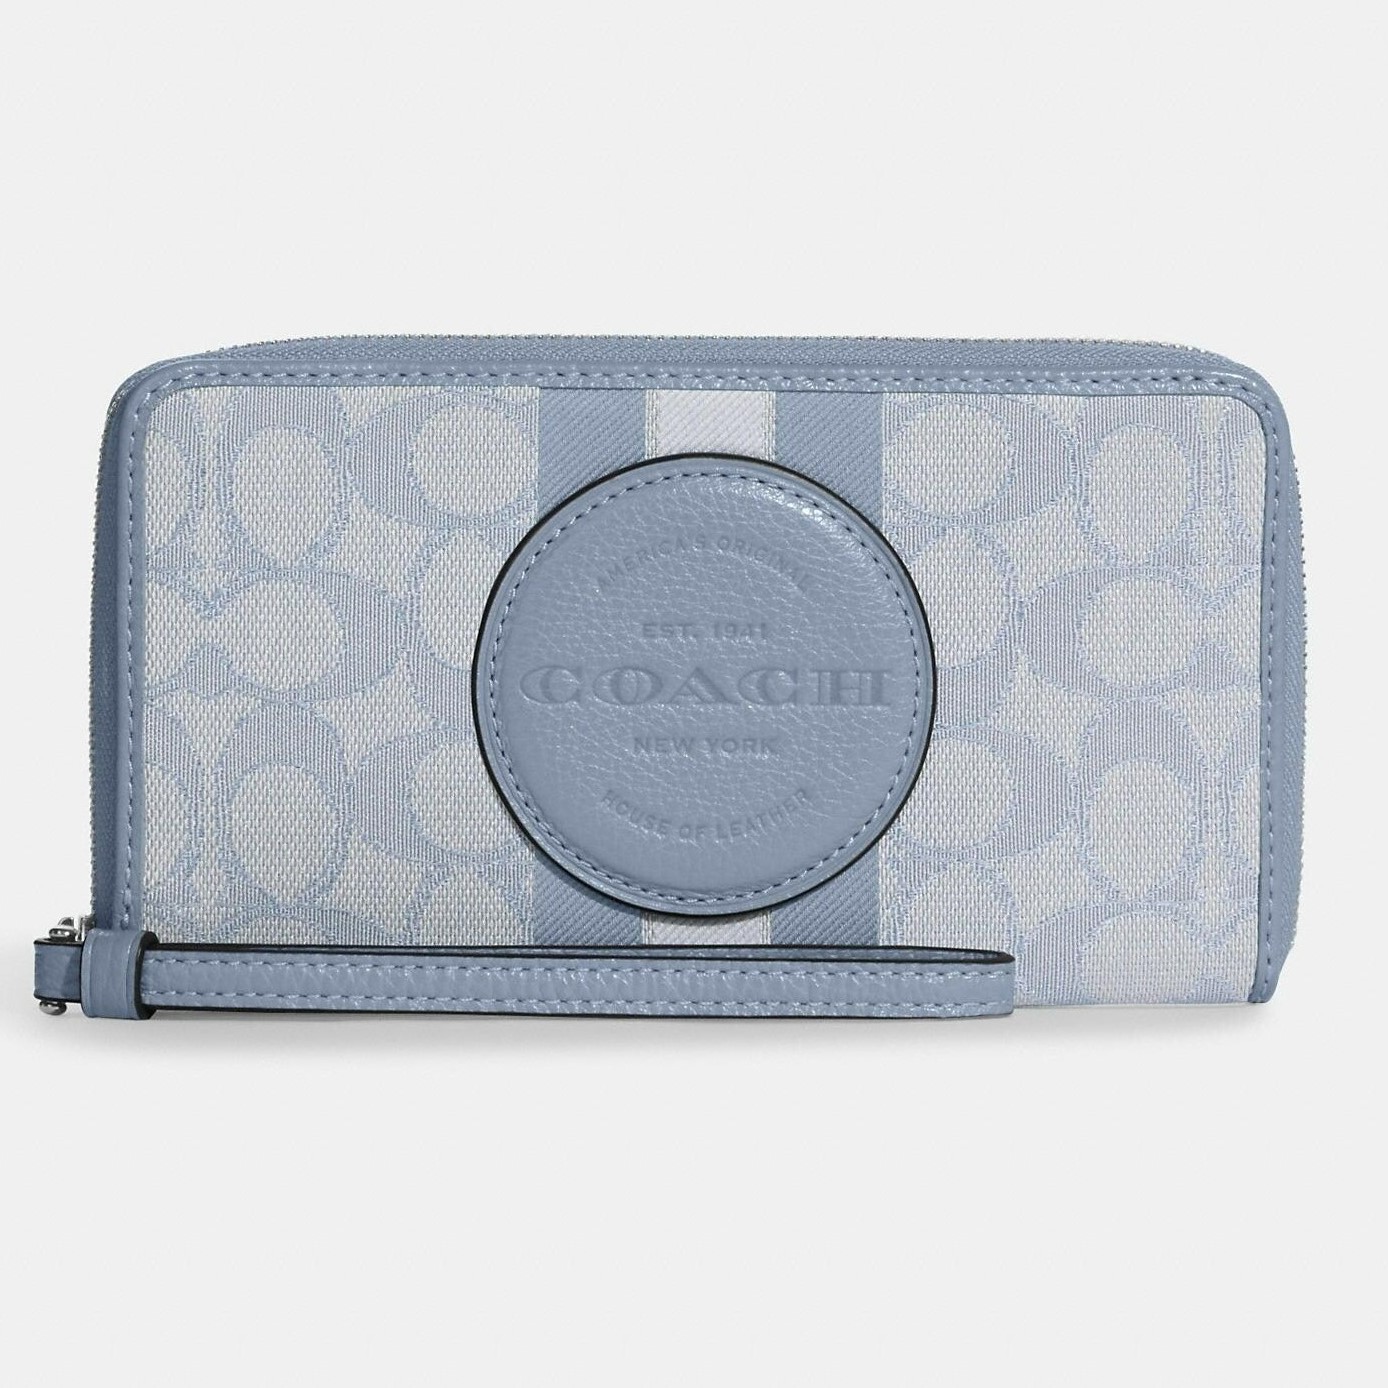 VÍ COACH DEMPSEY LARGE PHONE WALLET IN SIGNATURE JACQUARD WITH STRIPE AND COACH PATCH 12